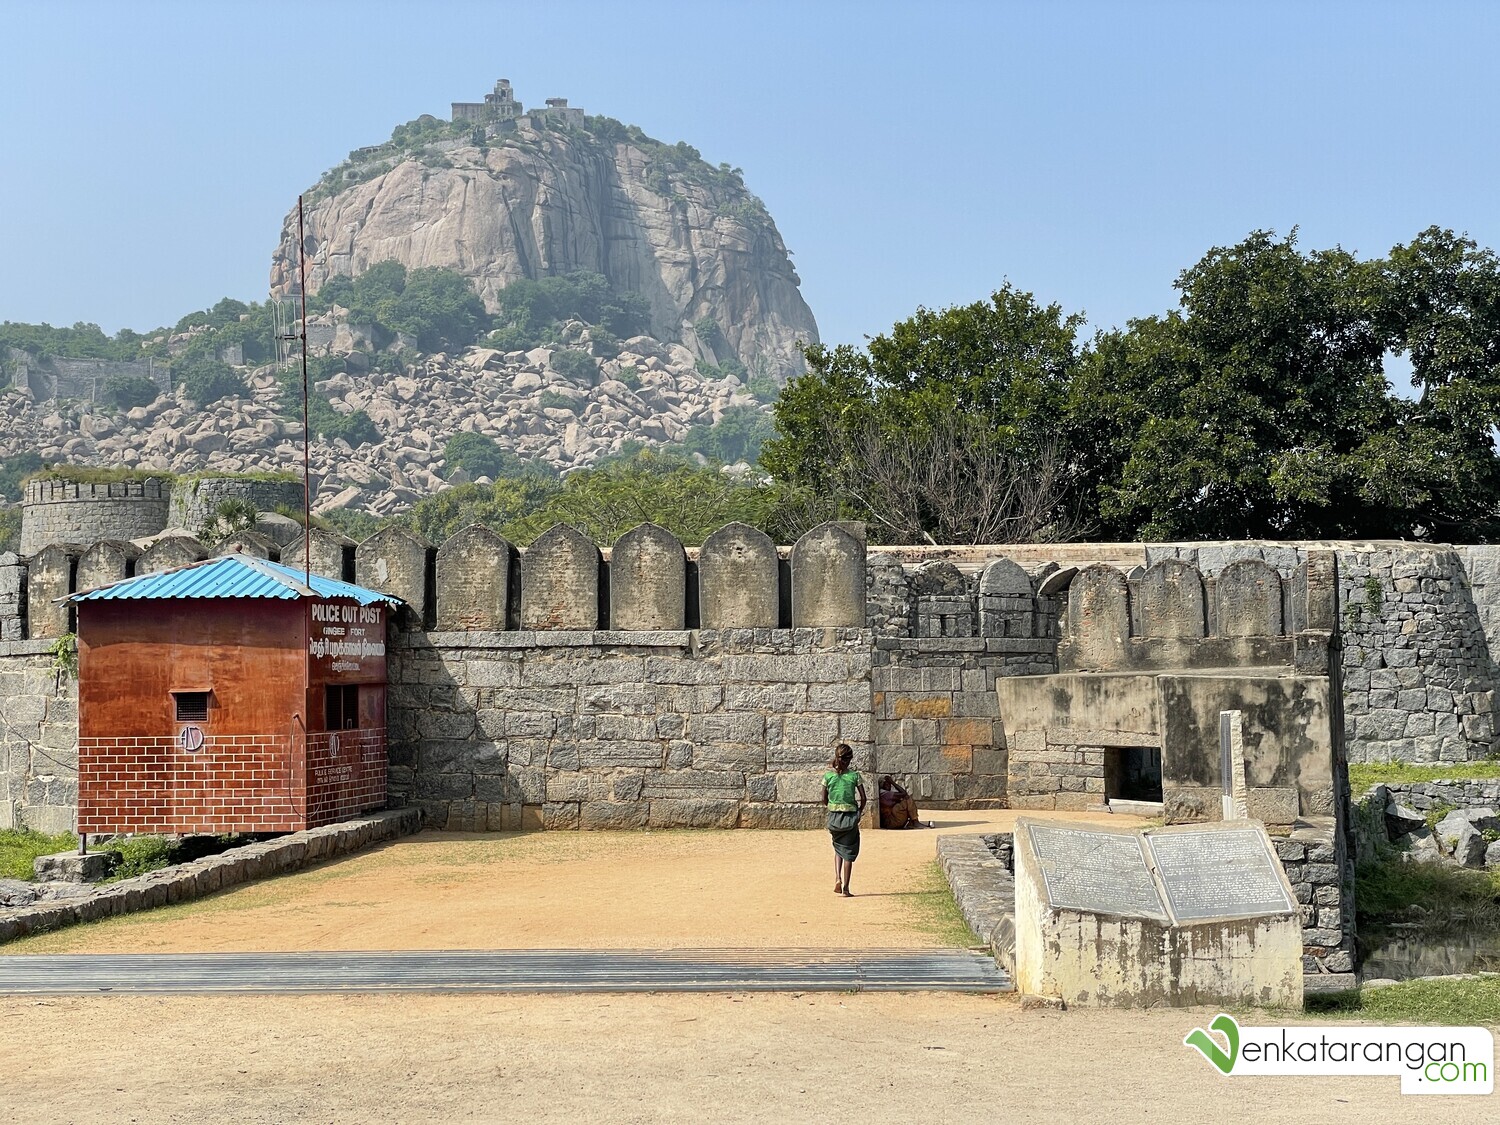 Entrance to Rajagiri fort (Gingee)